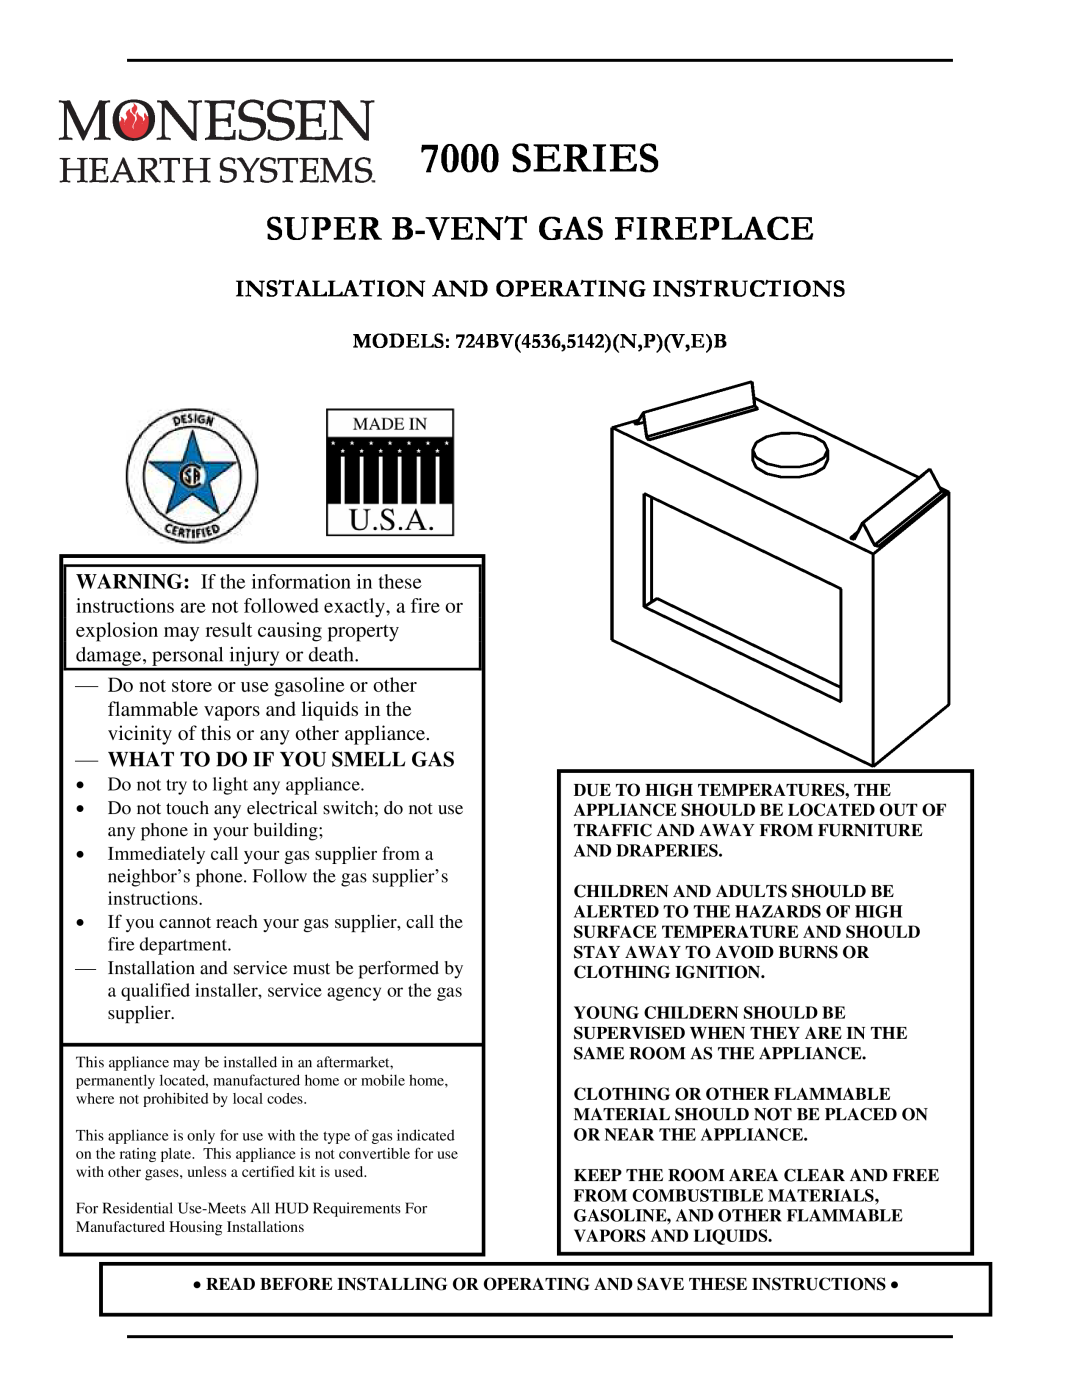 Monessen Hearth 7000 Series operating instructions Super B-Ventgas Fireplace, Installation And Operating Instructions 